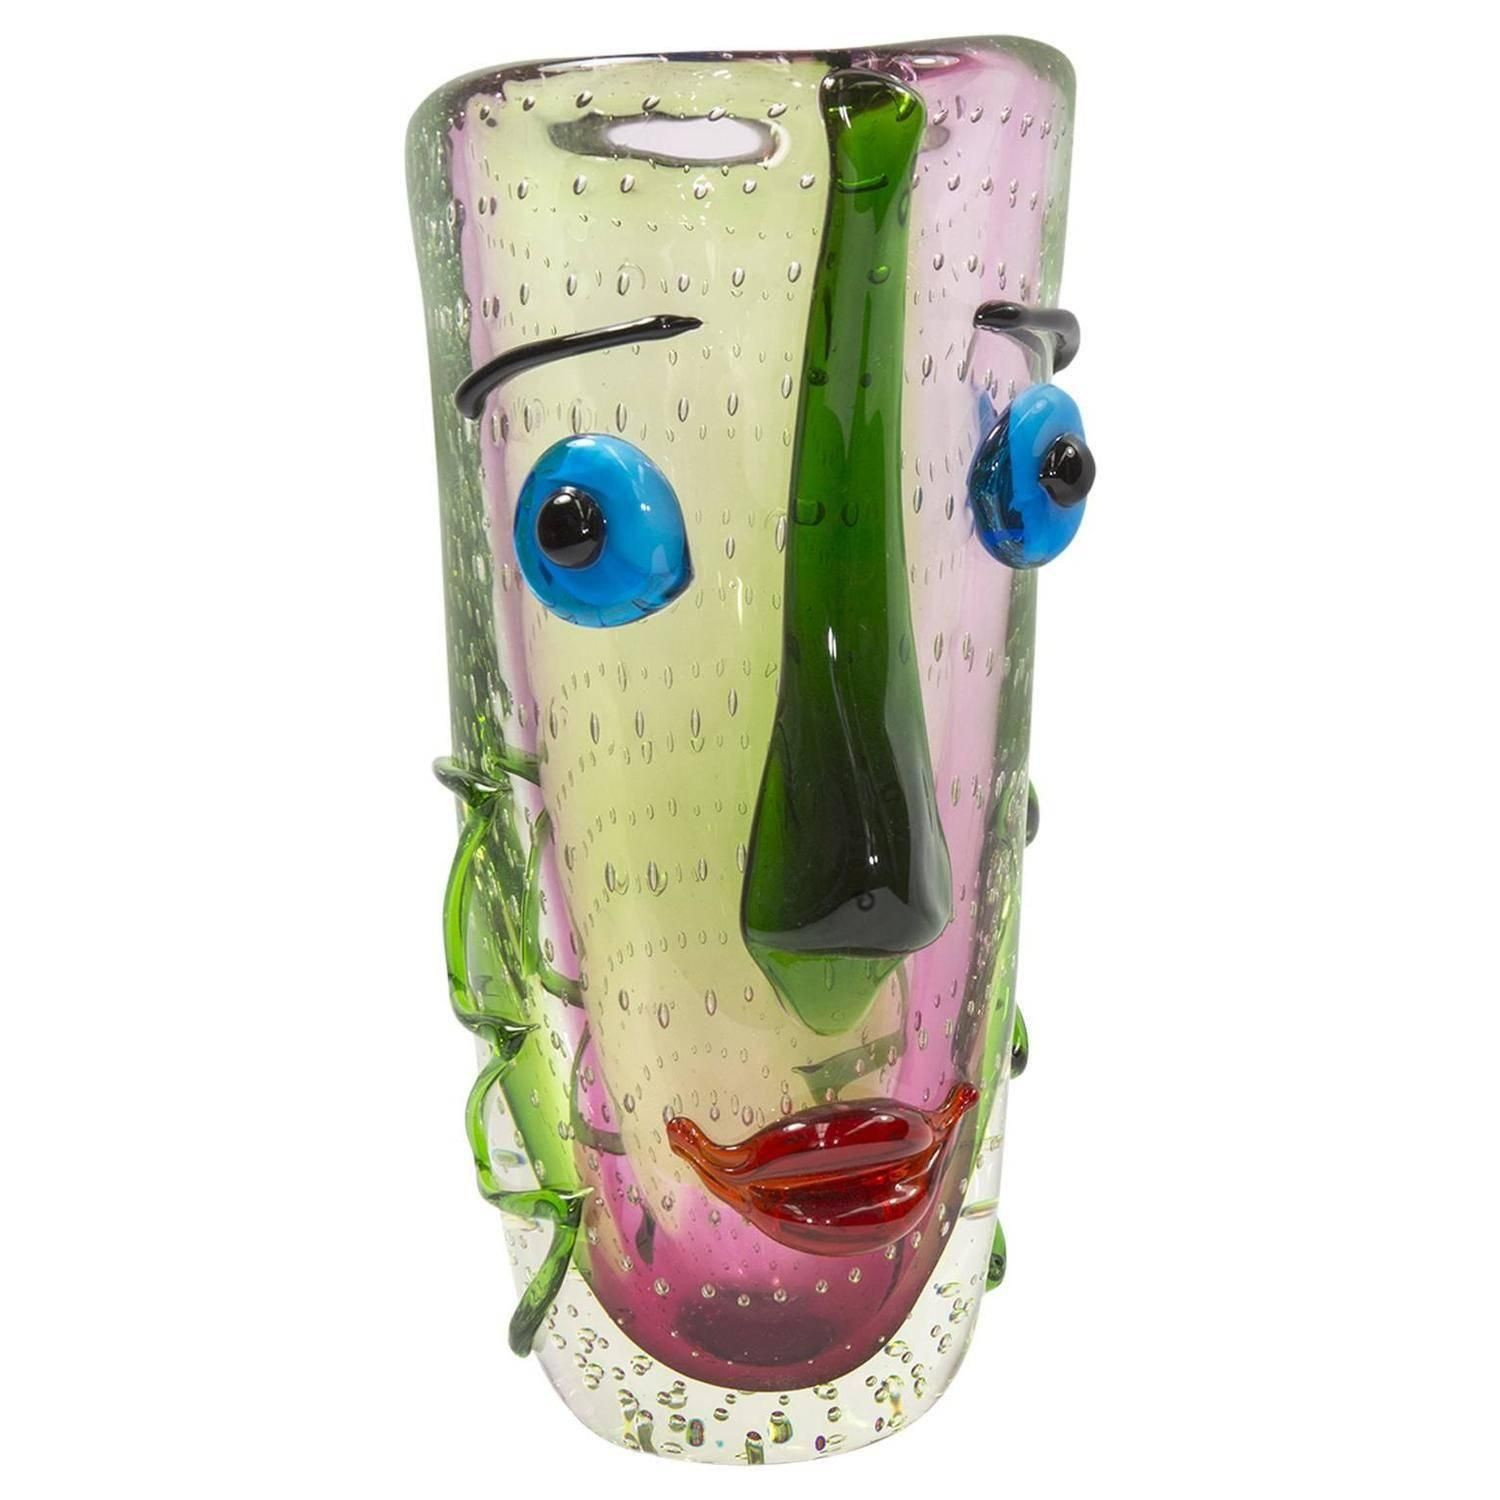 26 Fabulous Face Vases for Sale 2024 free download face vases for sale of fabulous large murano multicolored abstract picasso face art glass pertaining to fabulous large murano multicolored abstract picasso face art glass vase